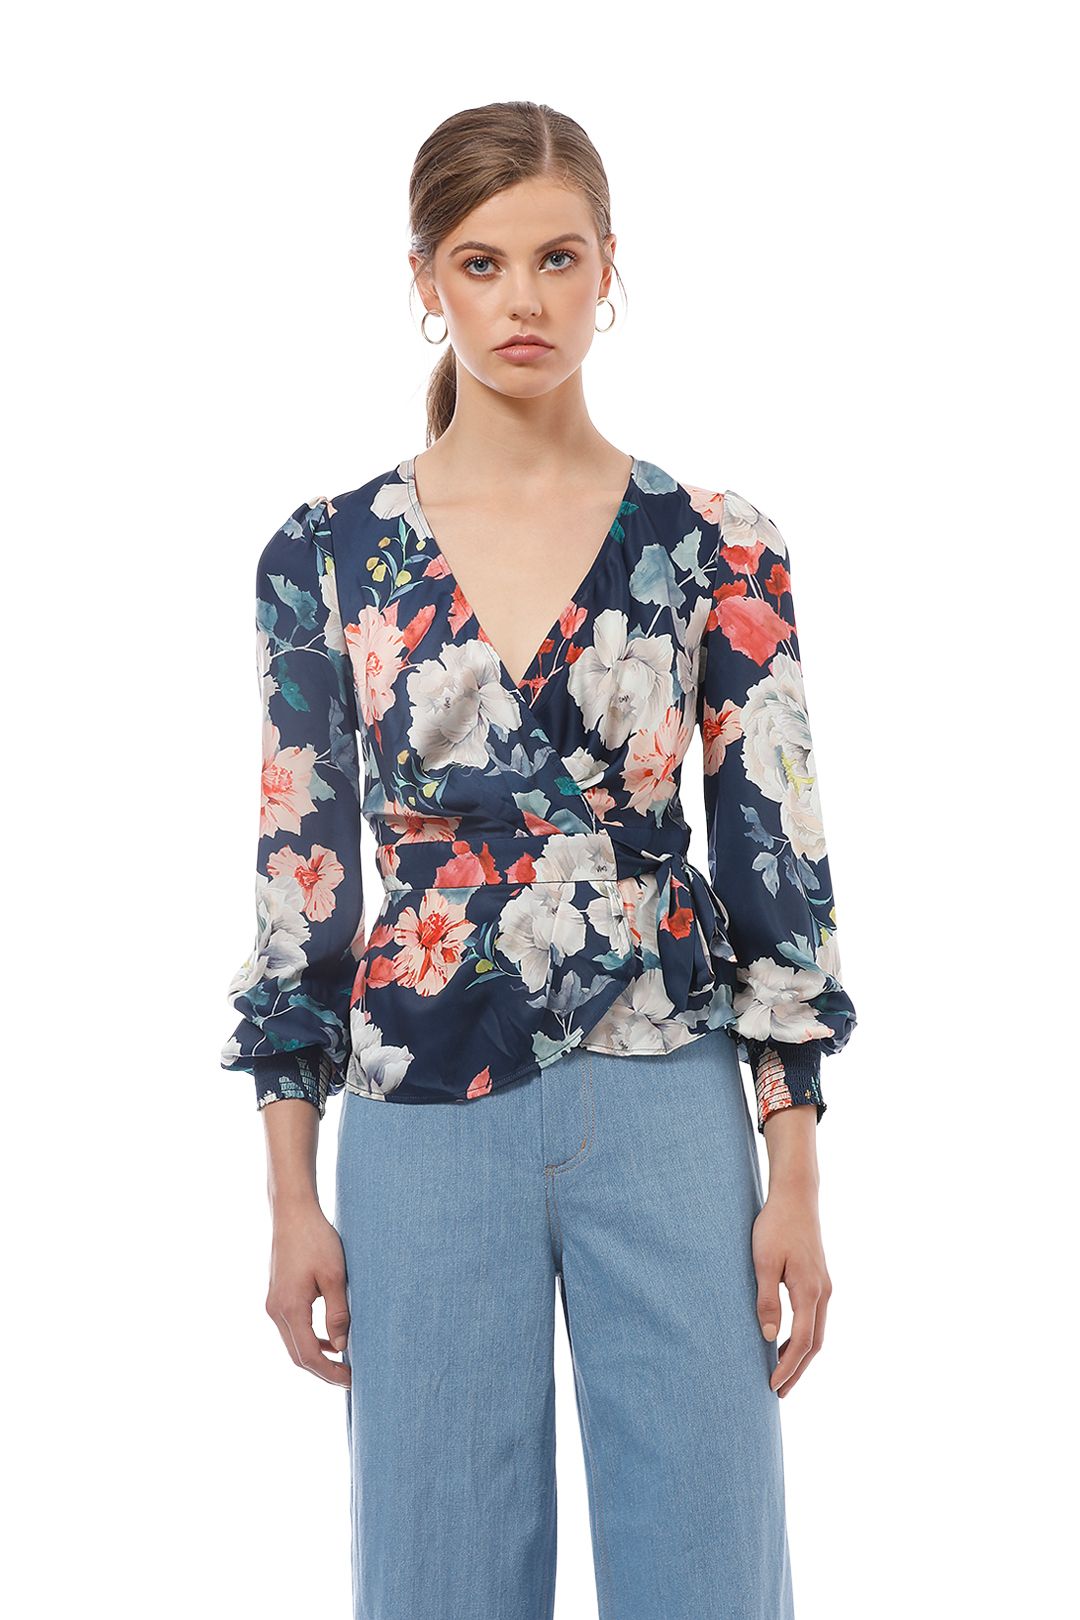 Sheike - Rosie Blouse - Navy Floral - Close Up